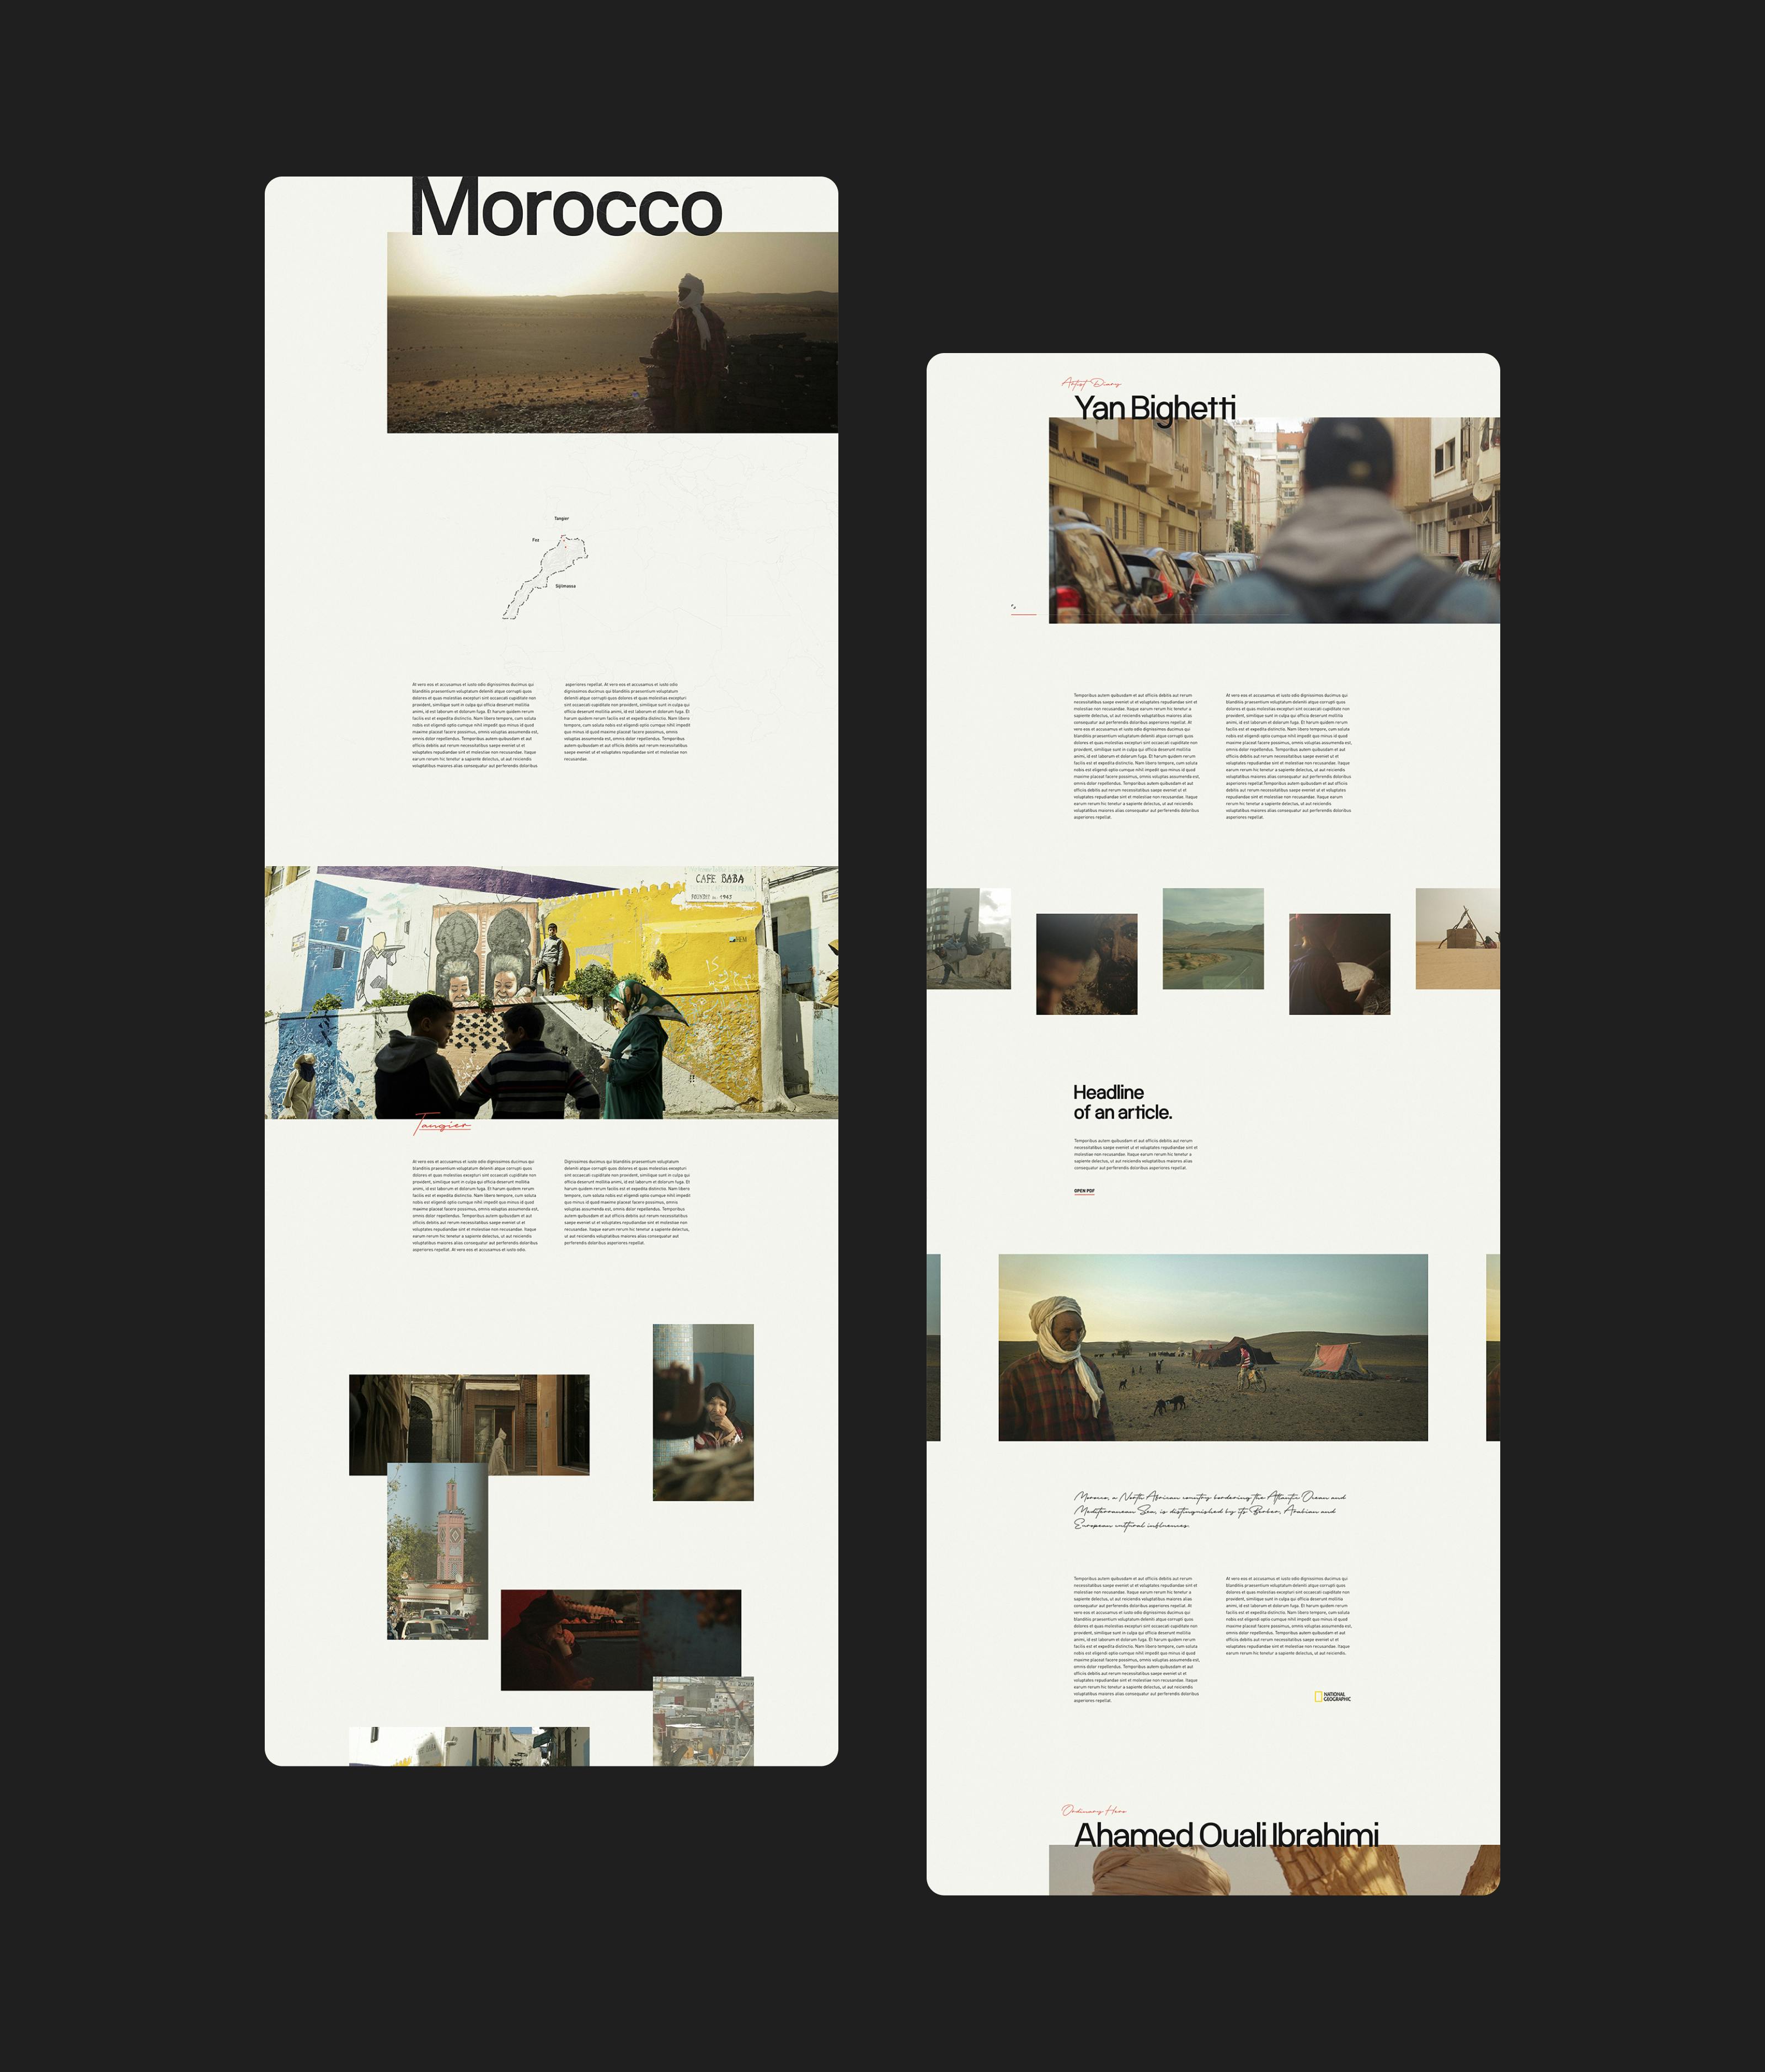 Extracts of the website - Morocco pages